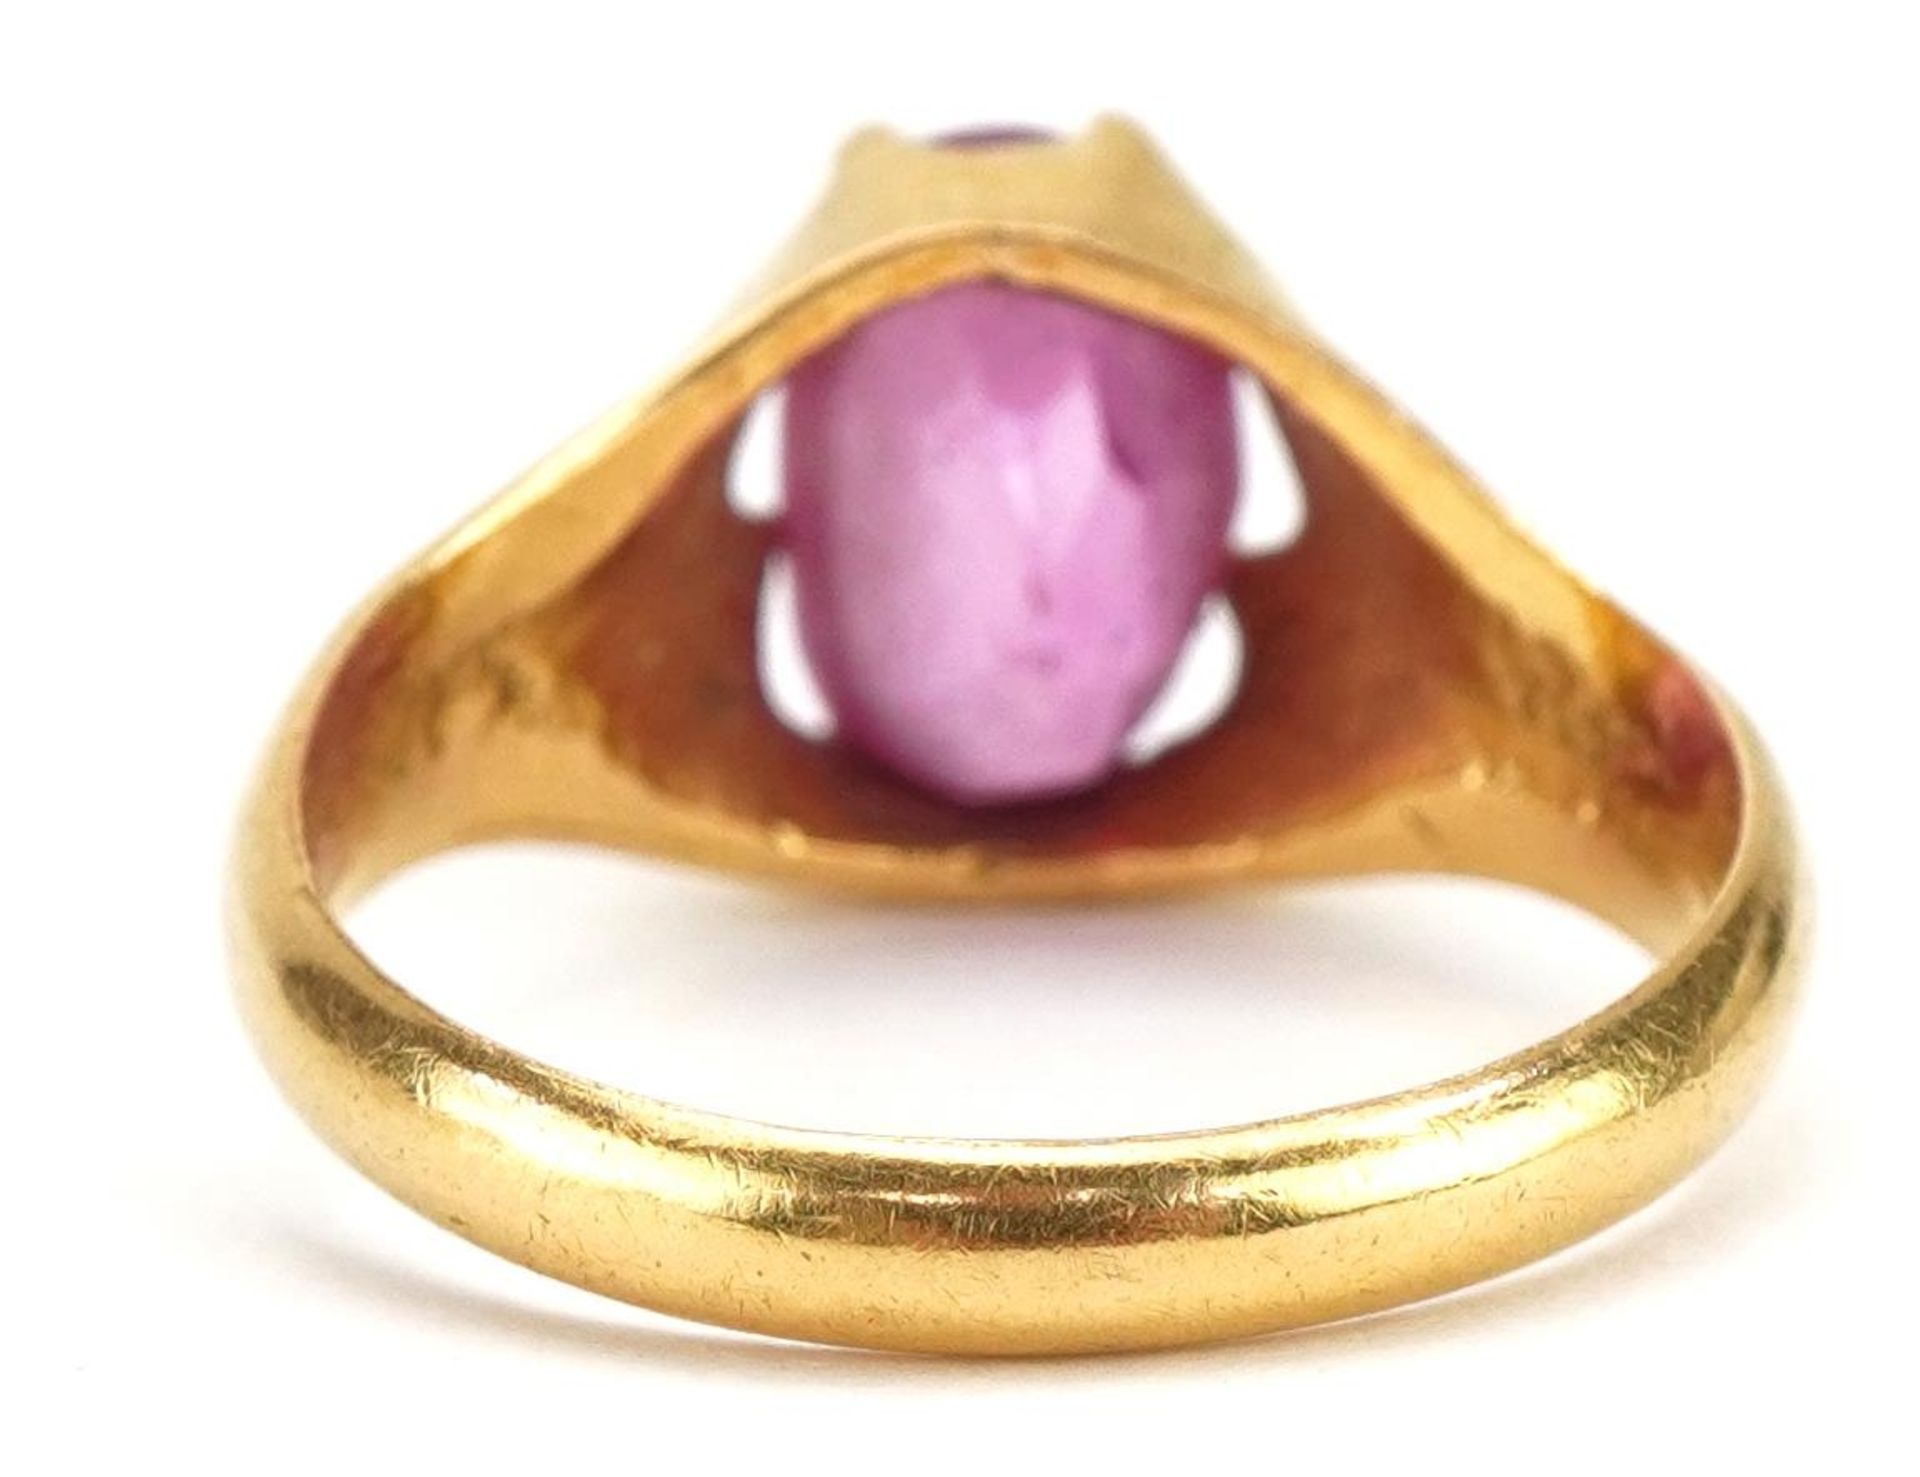 Unmarked gold ruby solitaire ring possibly Indian, tests as 22ct gold, the ruby approximately 10.1mm - Image 2 of 3